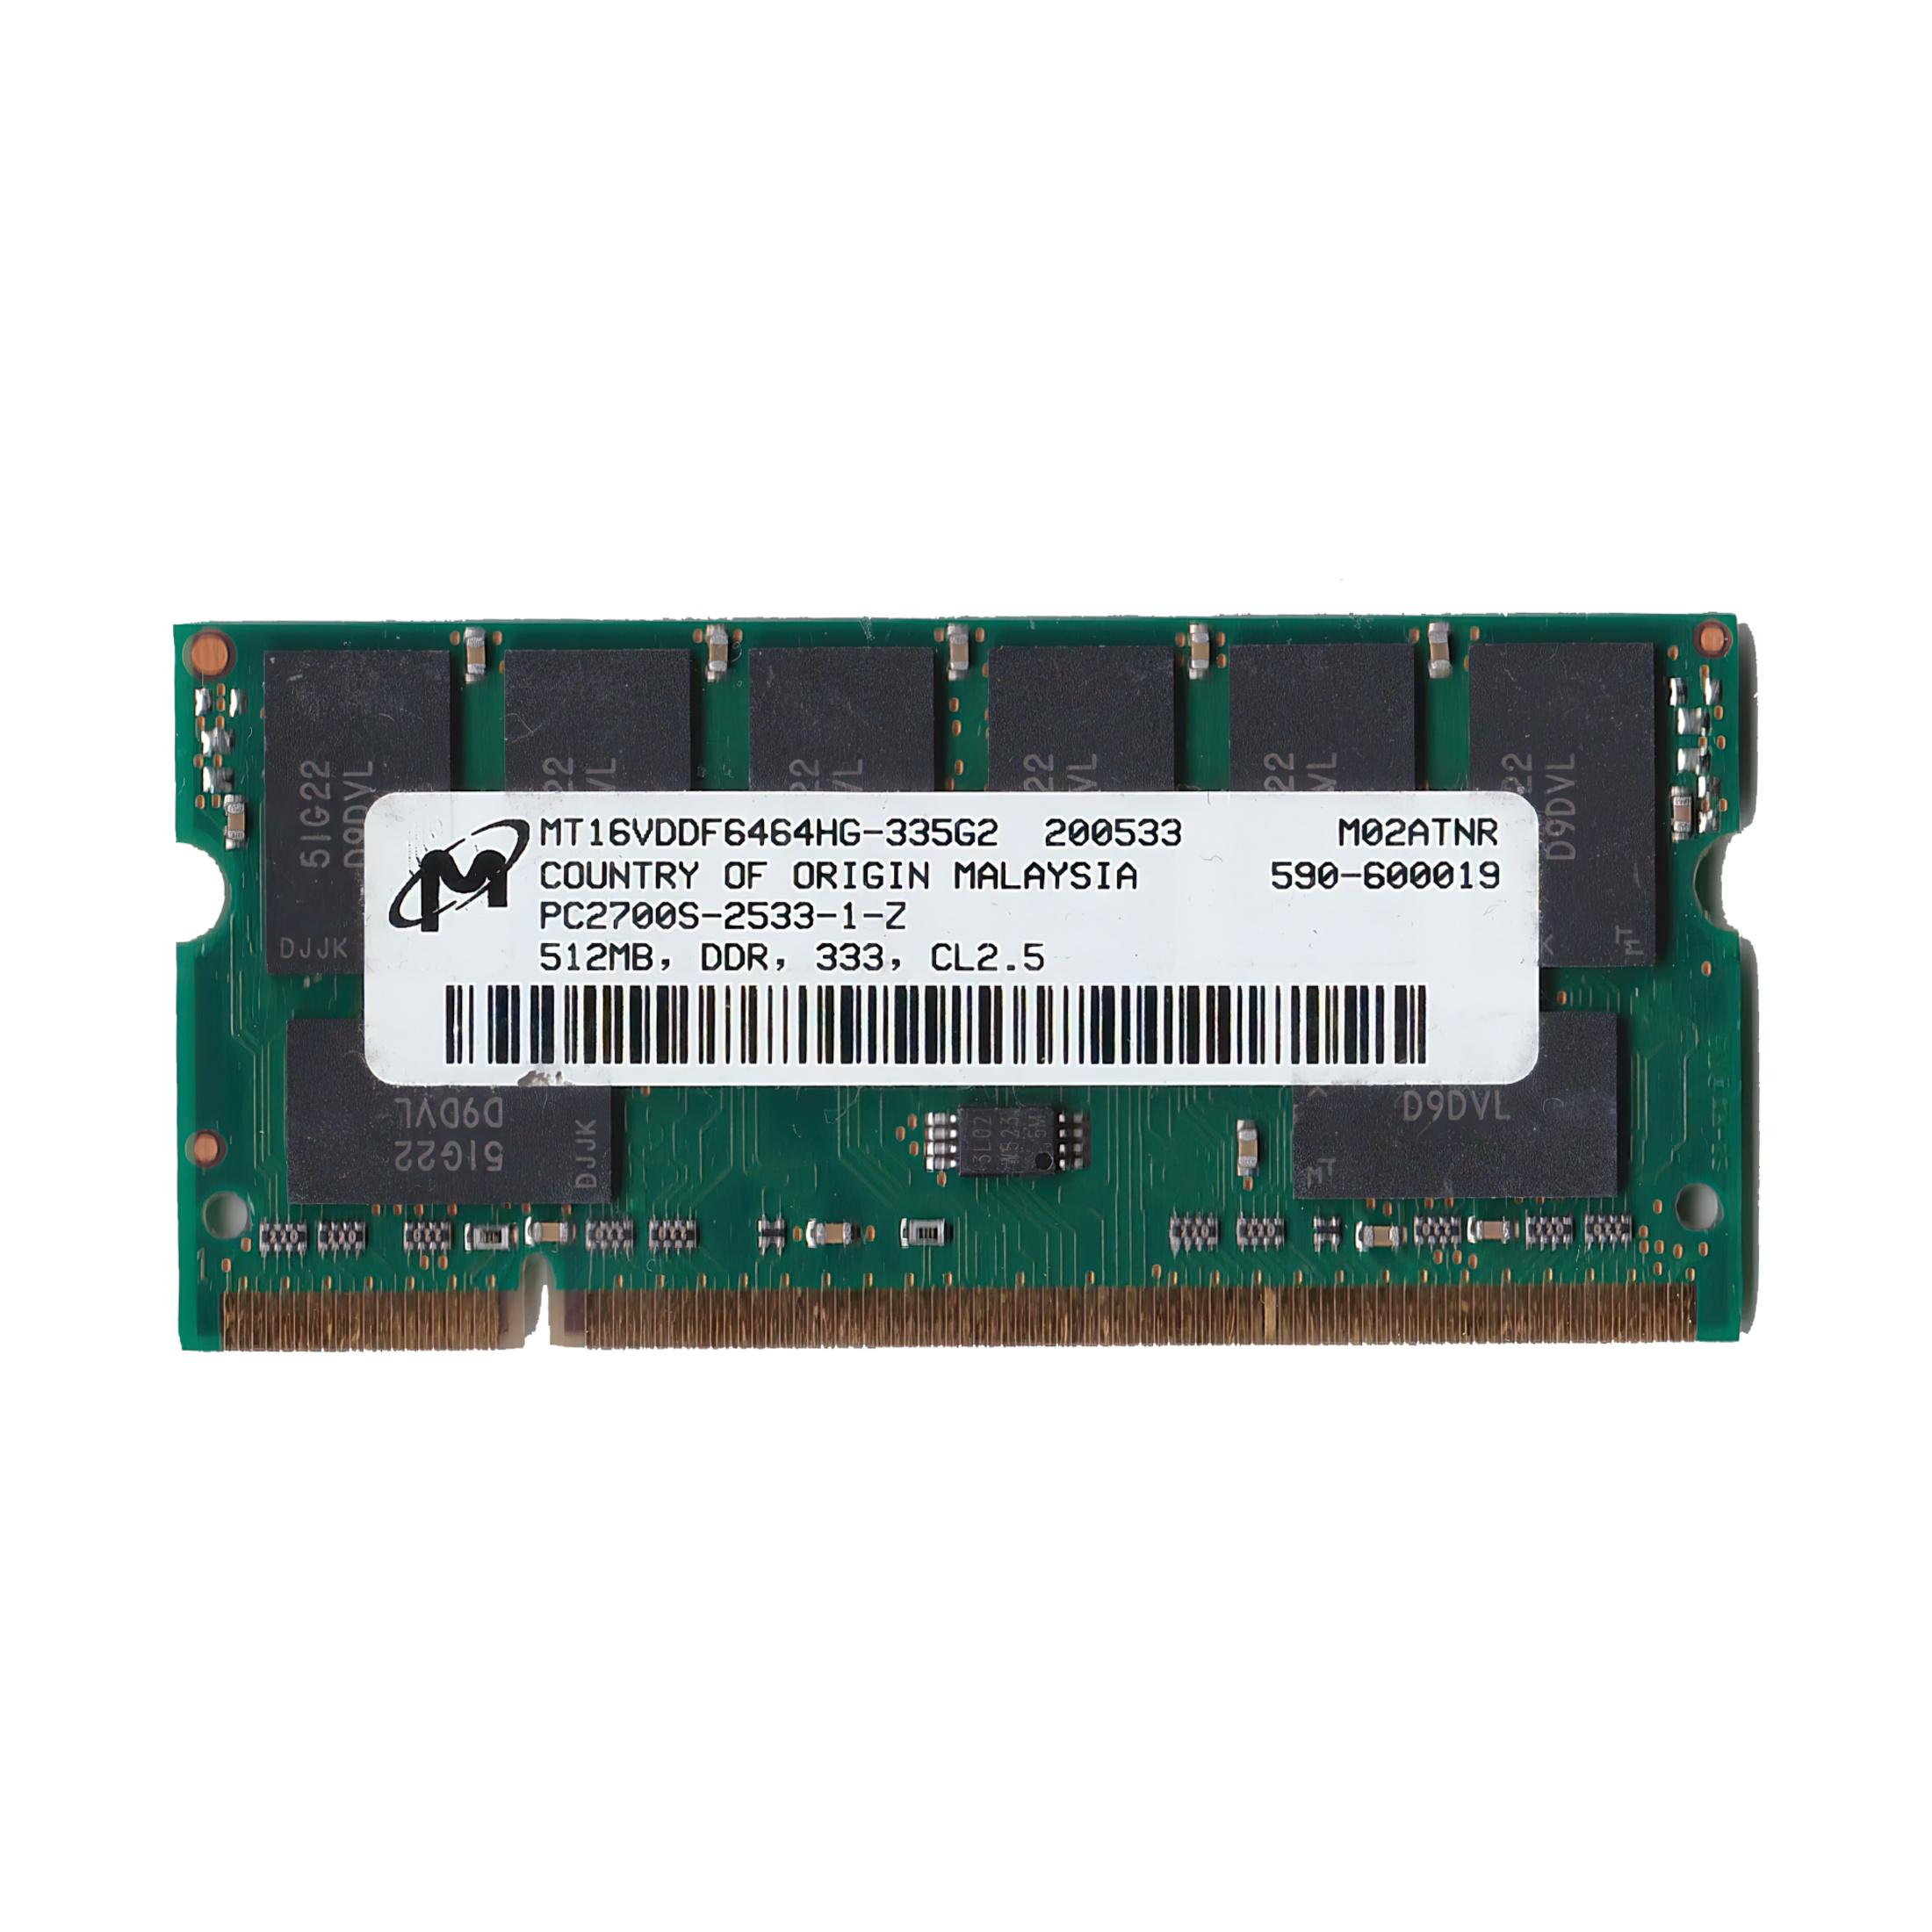 Preowned, Untested Micron PC2700S-2533-1-Z 512MB DDR-333 CL2.5 Laptop Memory Module - Priced to Clear